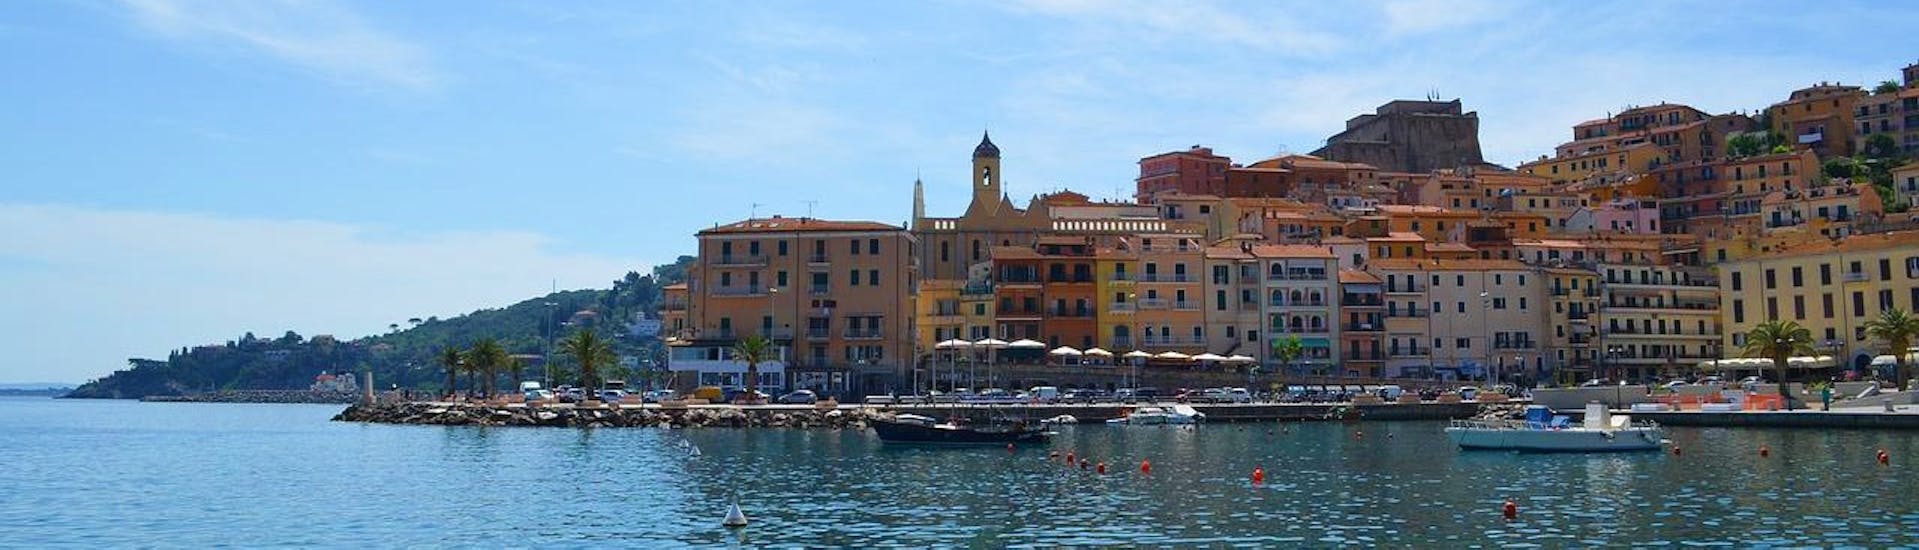 Wonderful panorama of the town Porto Santo Stefano as seen from the water during a RIB boat rental in Porto Santo Stefano (up to 3 people) with La Perla Nera dell'Argentario.